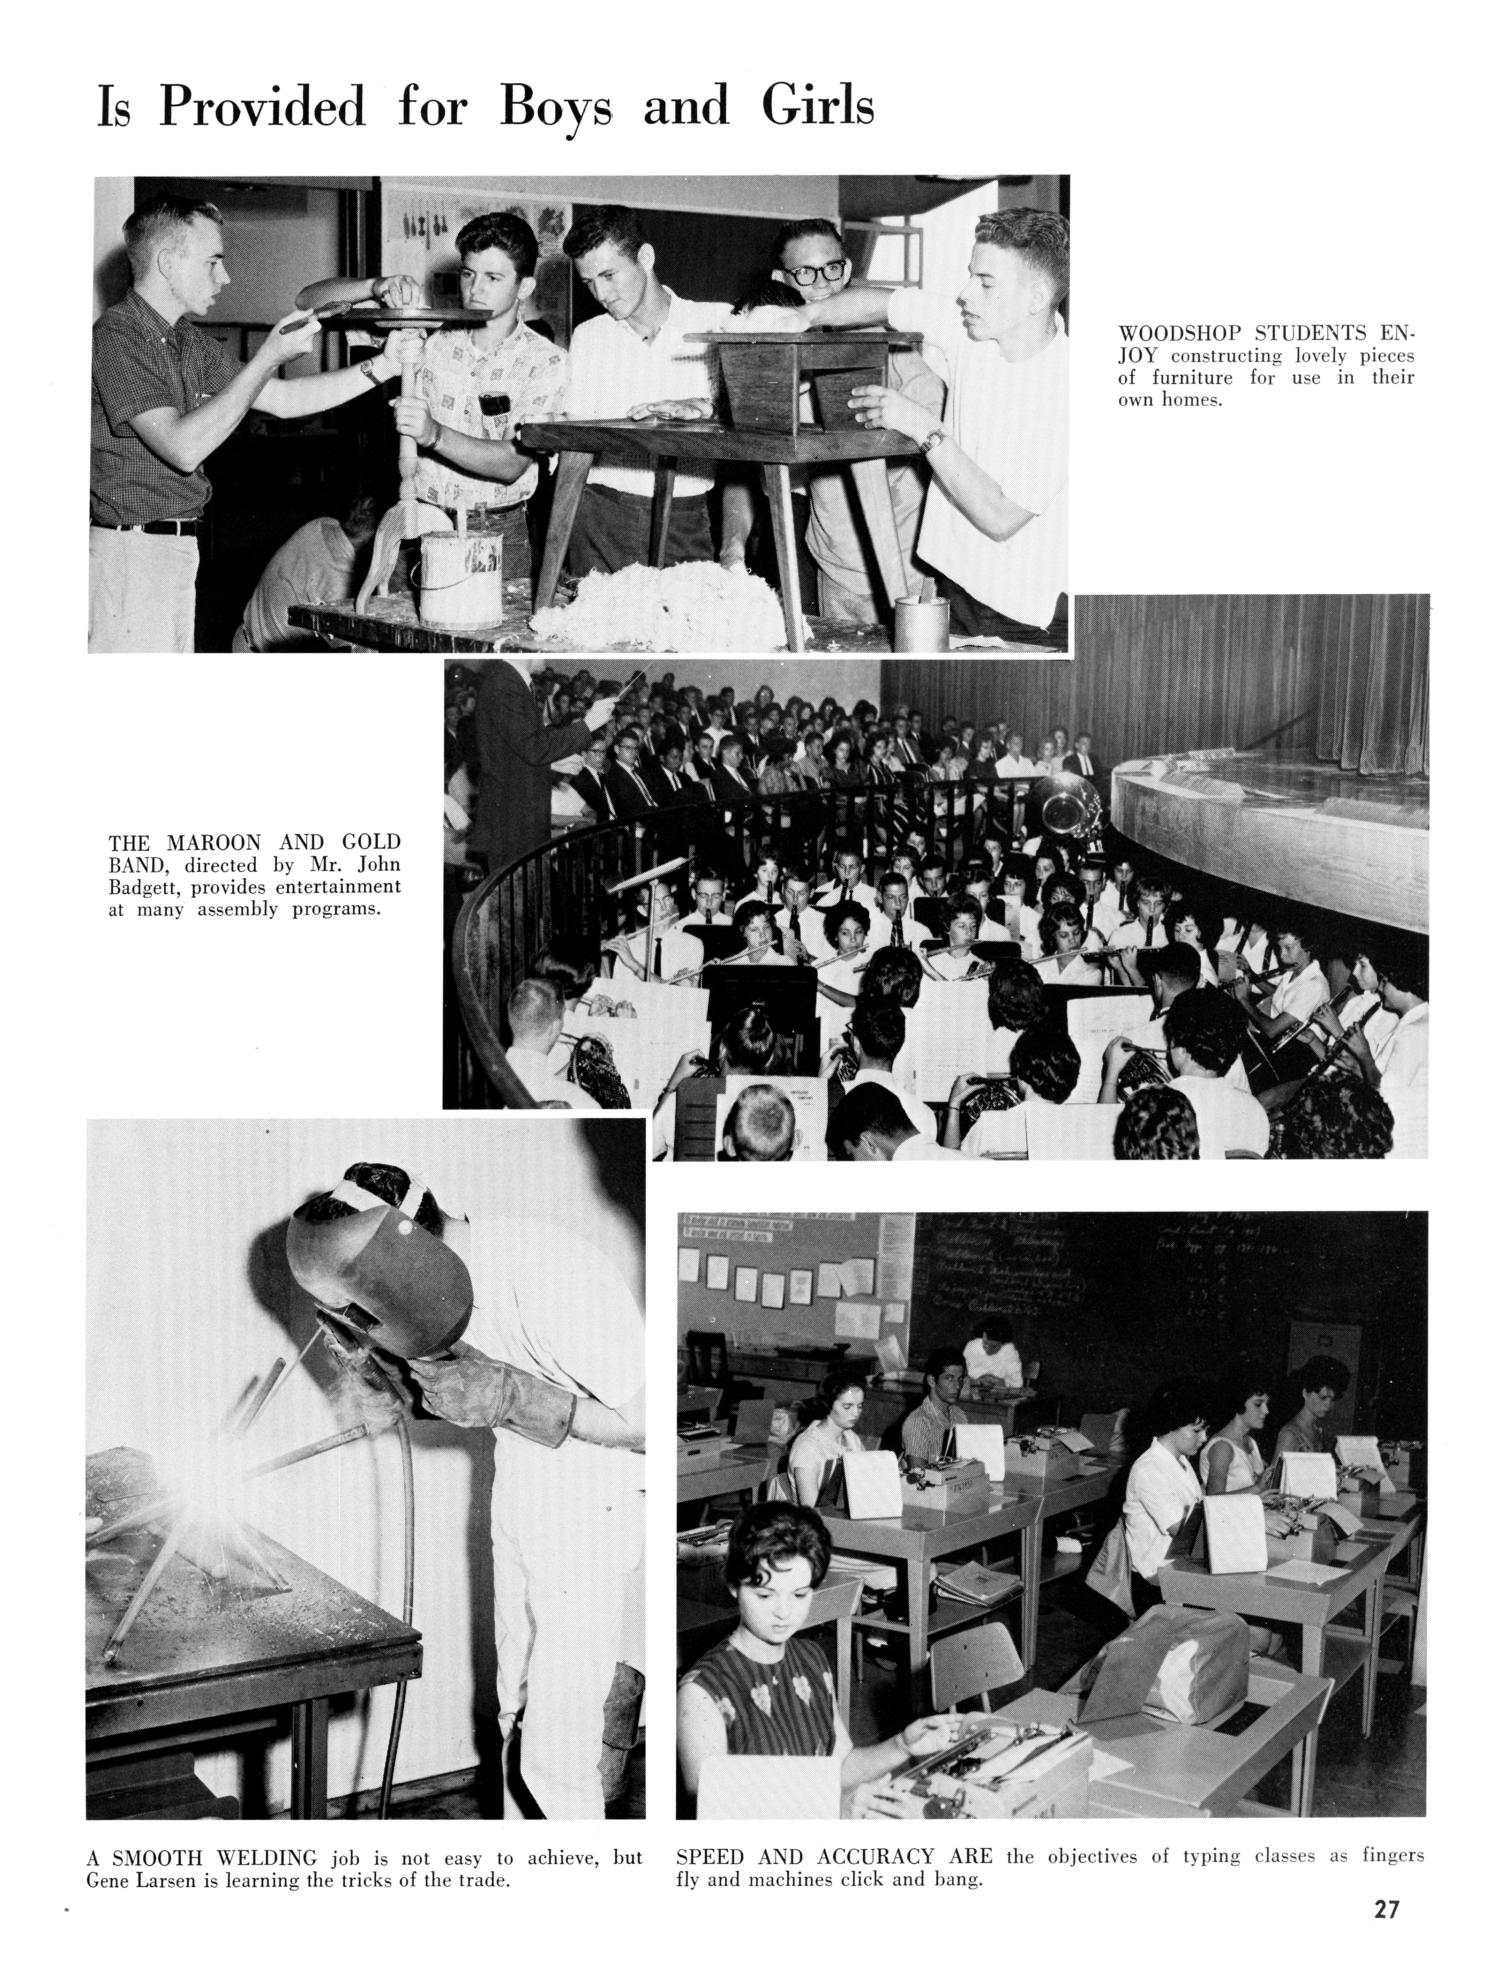 The Yellow Jacket, Yearbook of Thomas Jefferson High School, 1963
                                                
                                                    27
                                                